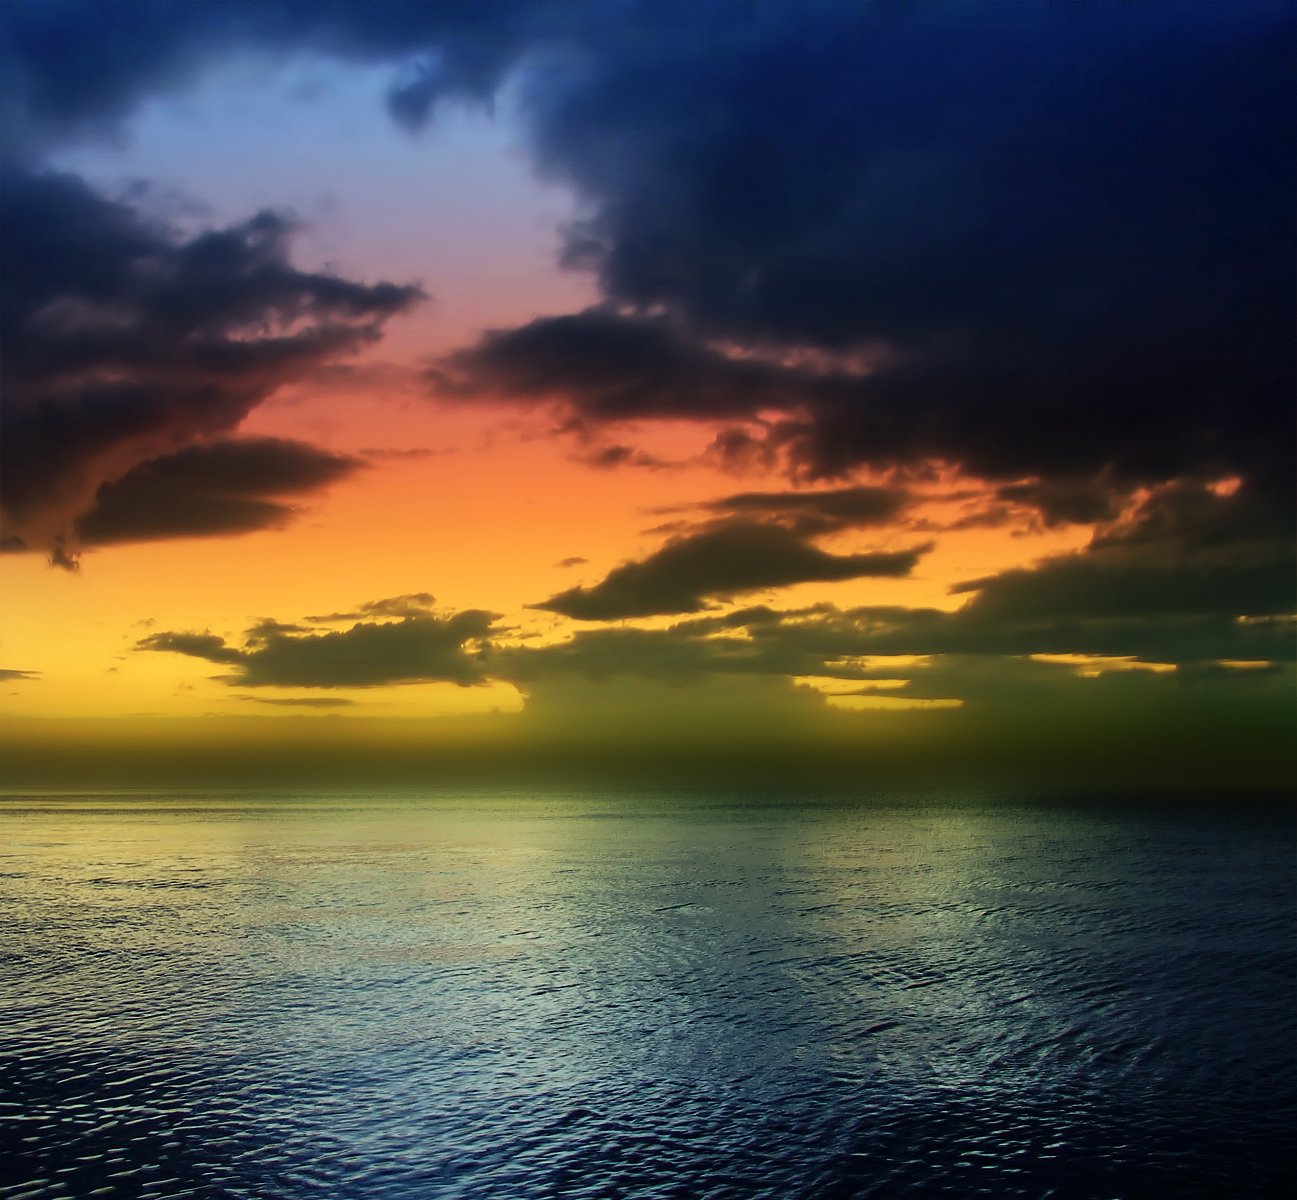 a body of water under a colorful sky with clouds